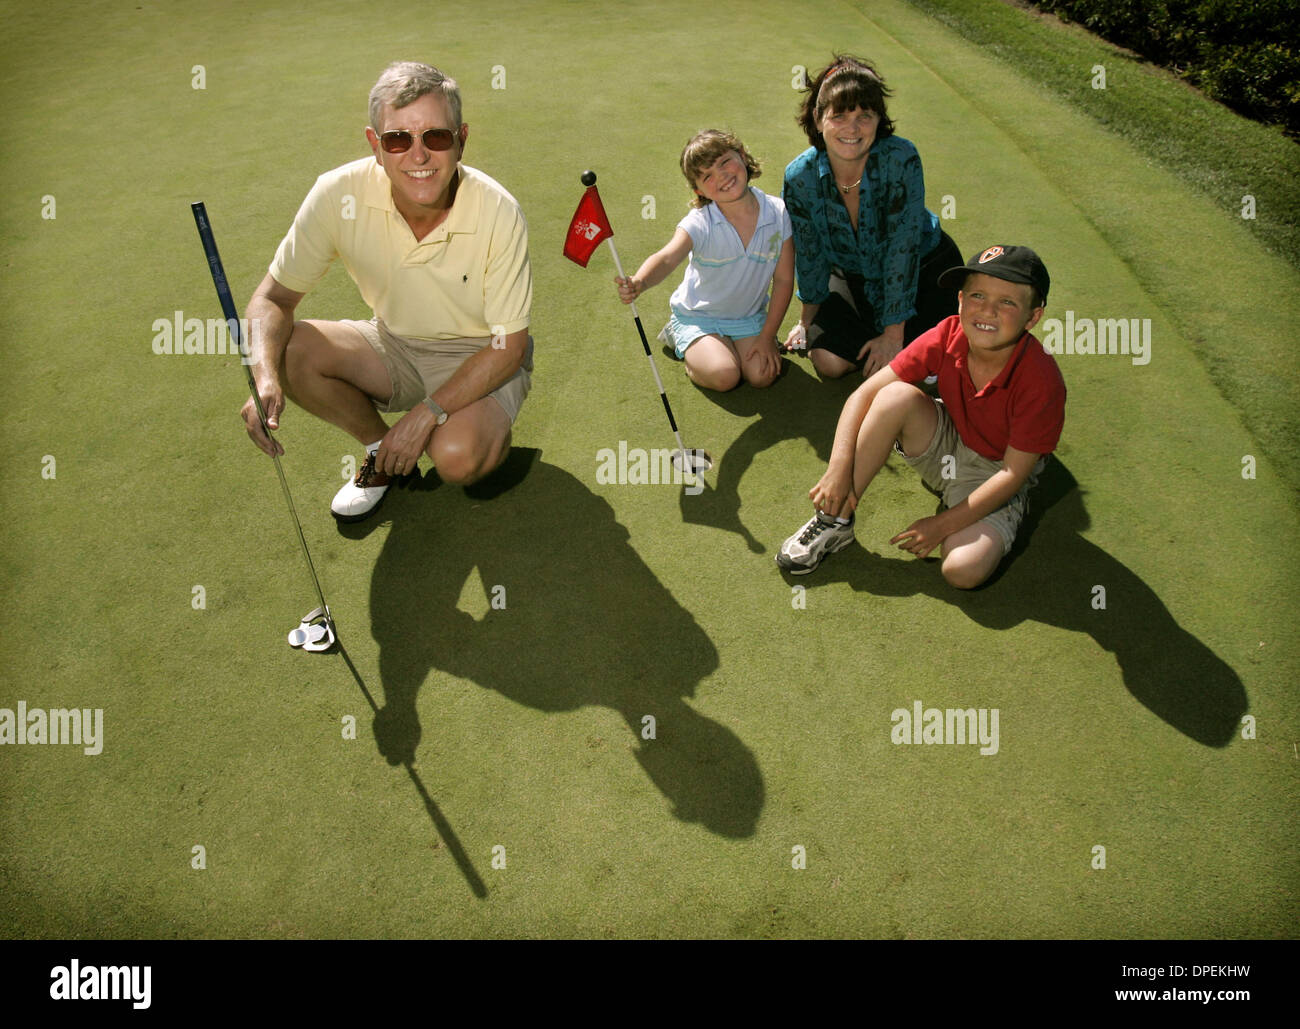 (published 9/21/2005, NC-4) Toy maker Dave Wyman, left, posed for a photo at the Rancho Santa Fe Farms Golf Course with his children Zach, 8, Nikki, 6, and wife Elaine Worzala. Stock Photo